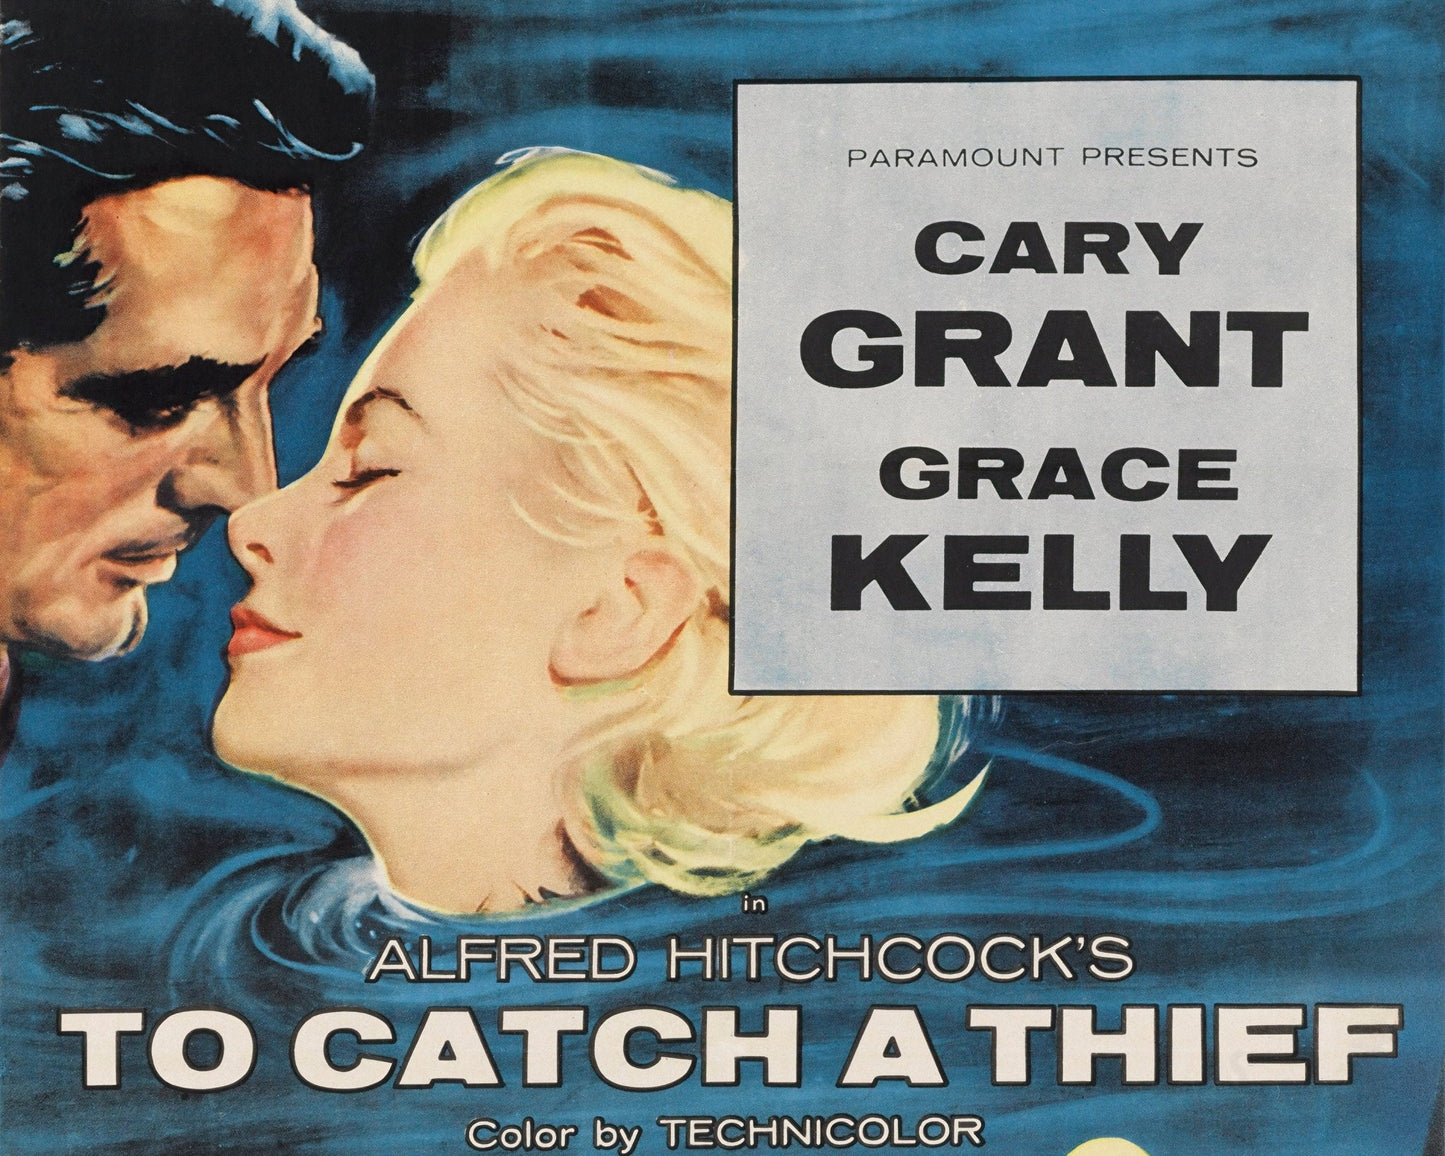 Vintage Movie Poster "To Catch a Thief" (1955) Alfred Hitchcock - Mabon Gallery